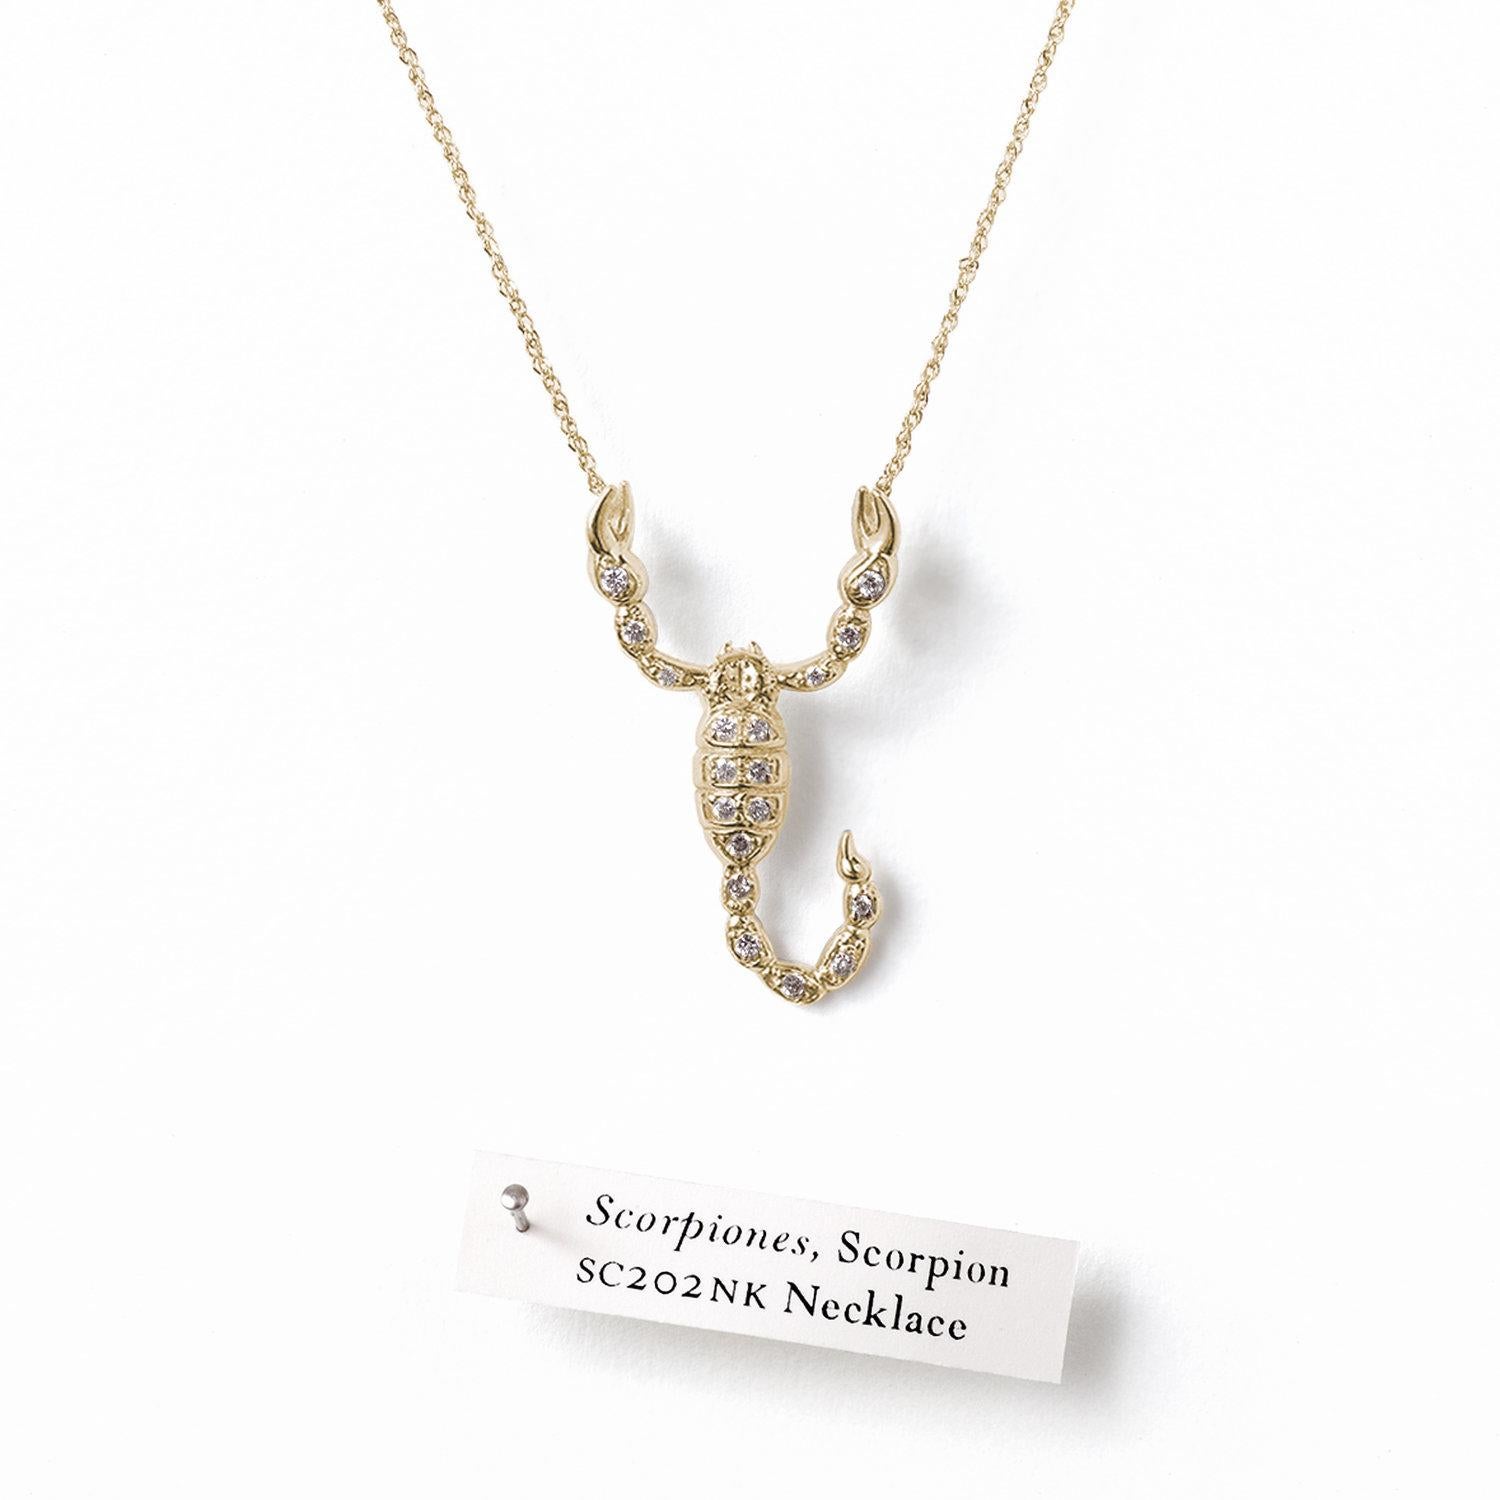 Introducing the Large Scorpion Necklace in Yellow Gold Plating with White Sapphires, a stunning and captivating piece that effortlessly blends boldness and elegance.

Ref Code: SC202NK PL WS YG

- Embrace the Power: Witness the mesmerizing effect as